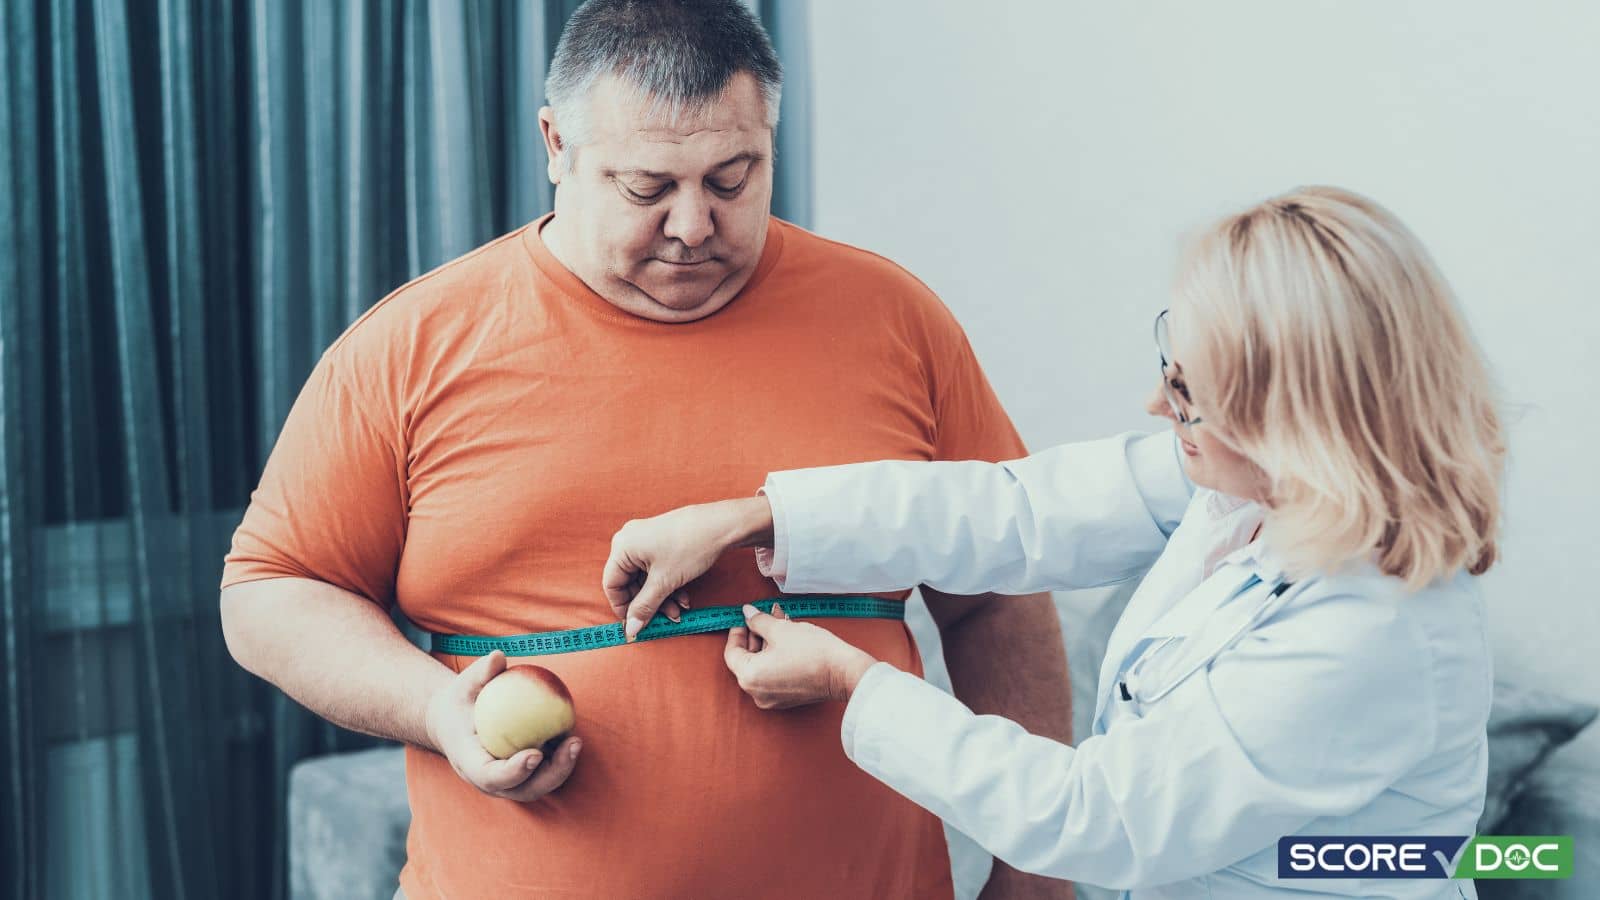 Top-Rated Bariatric Specialist Centers in and Around Dallas, TX